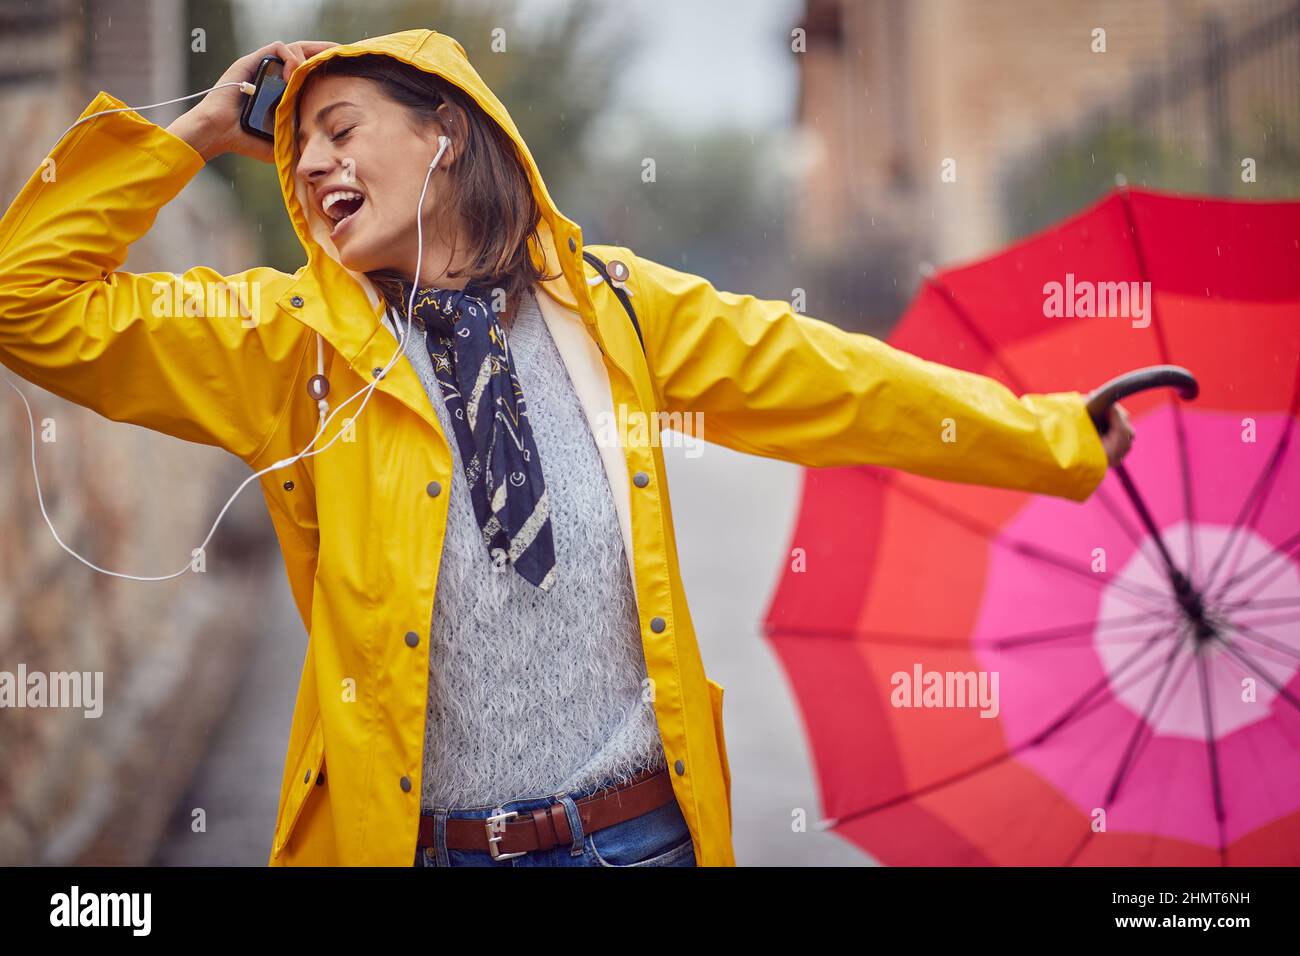 Close-up of a young cheerful woman in a yellow raincoat who is enjoying while listening to the music and walking the city in a good mood on a rainy da Stock Photo